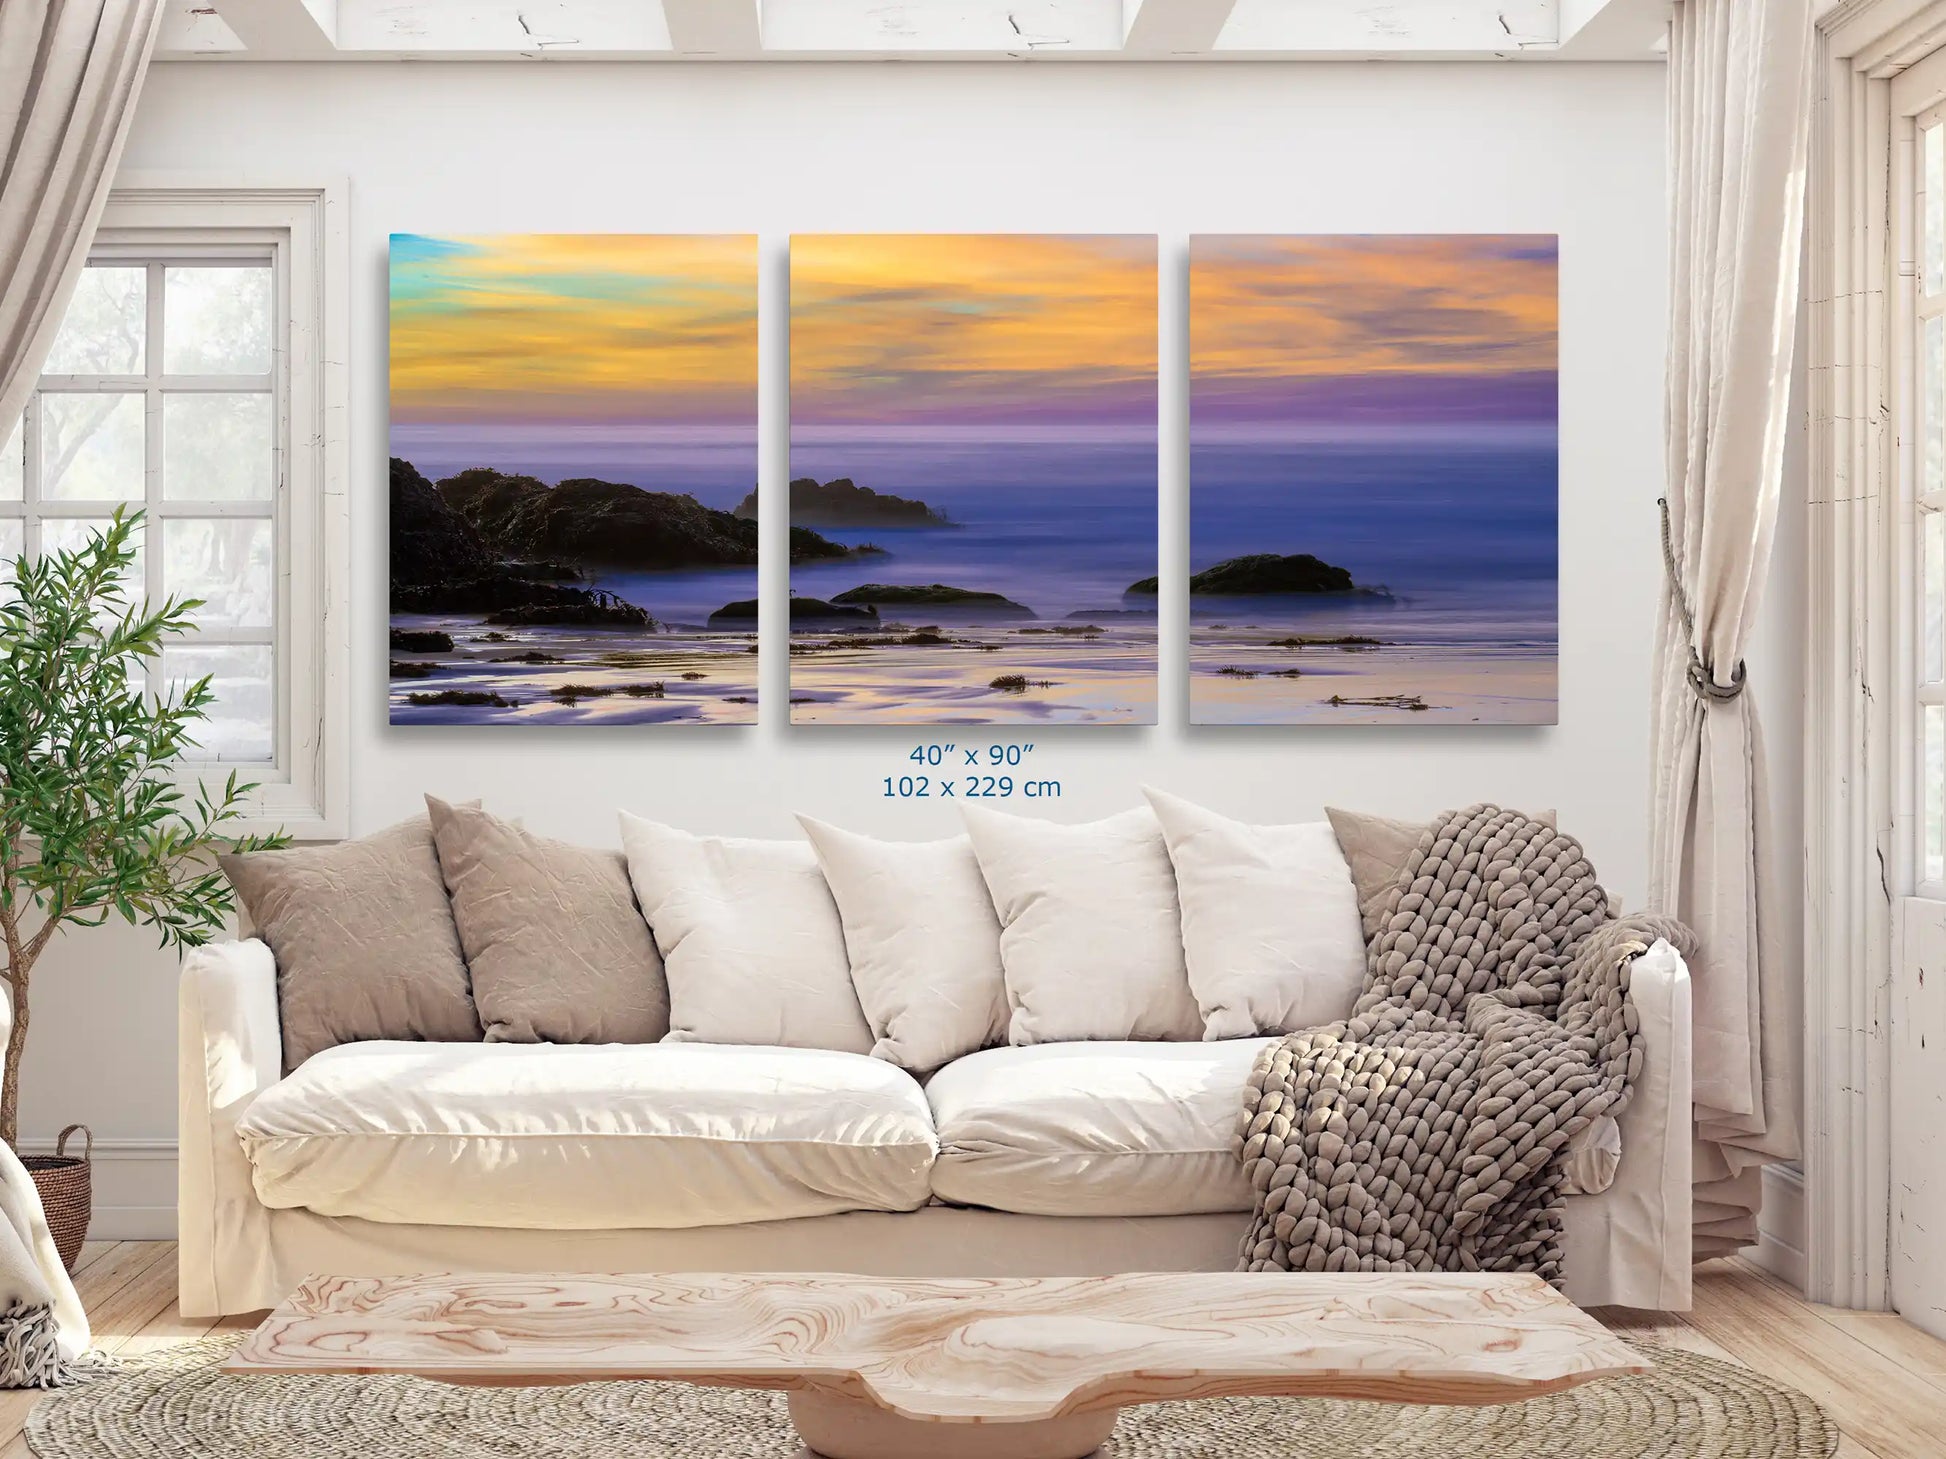 A 40x90 triptych wall art set against a couch, each panel capturing the enchanting sunset colors over Purple Sand Beach in Big Sur, for an immersive aesthetic experience.